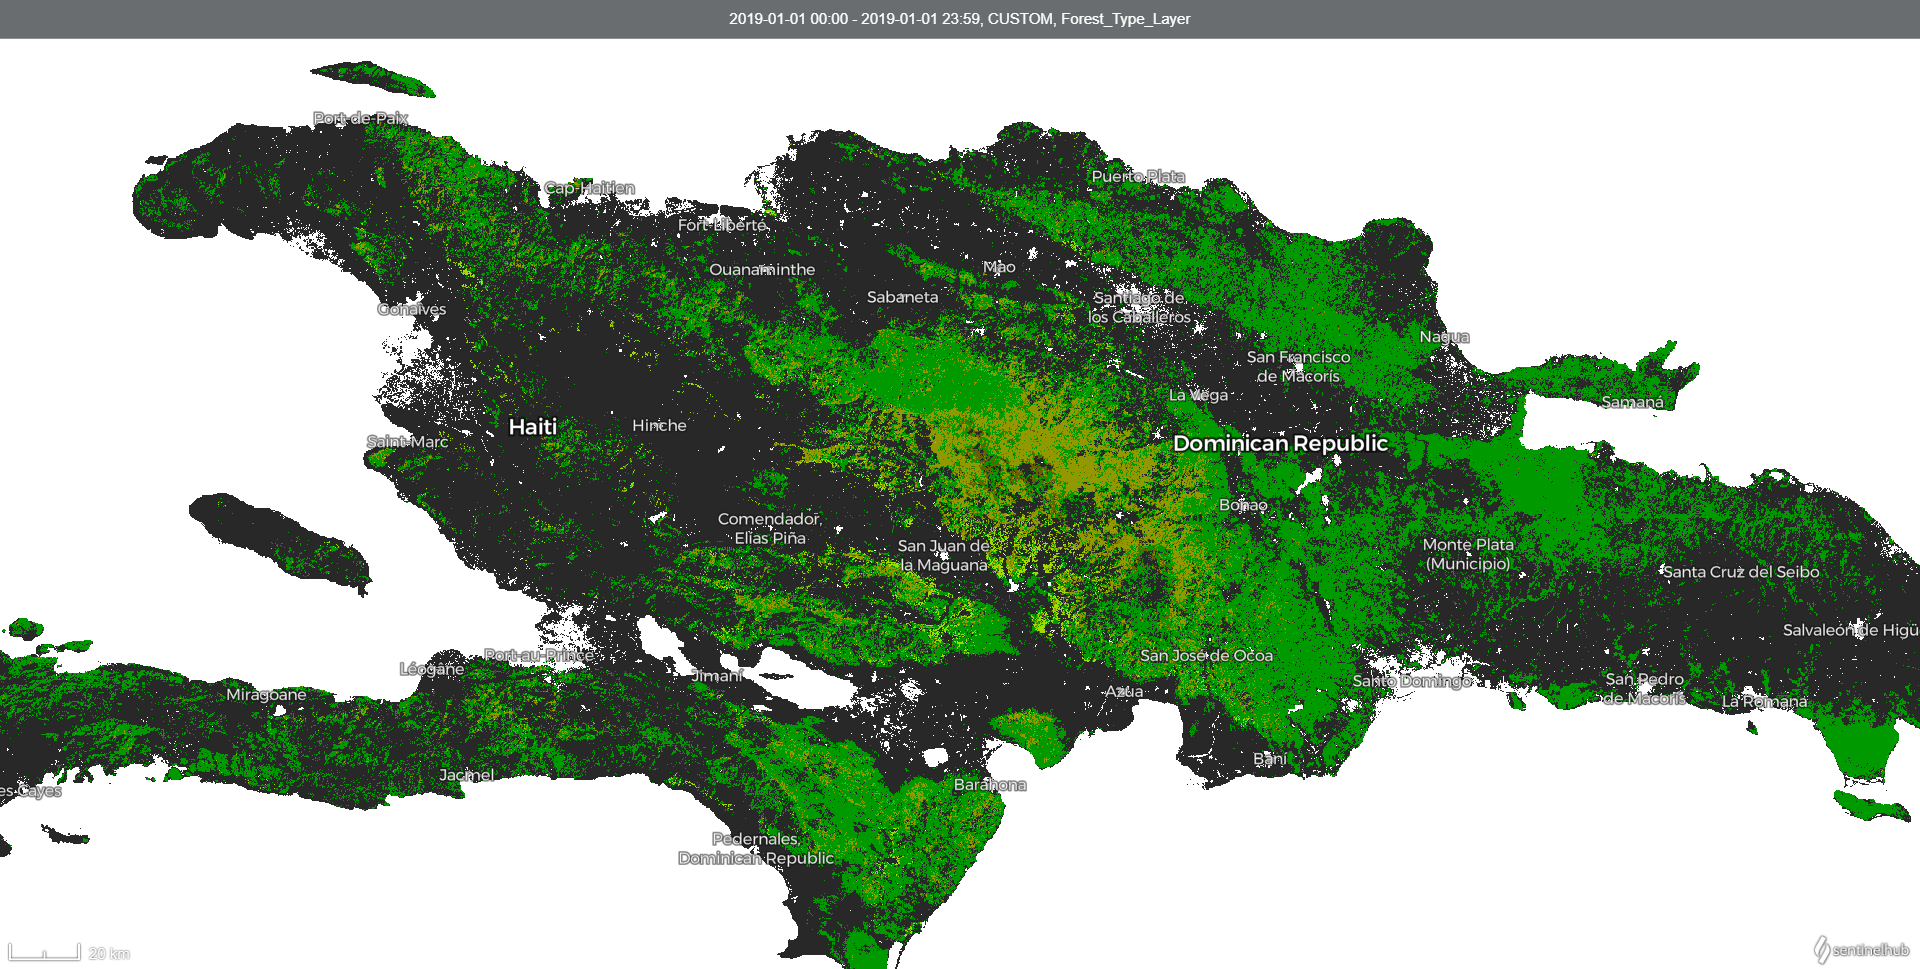 forest type map for Dominican Republic